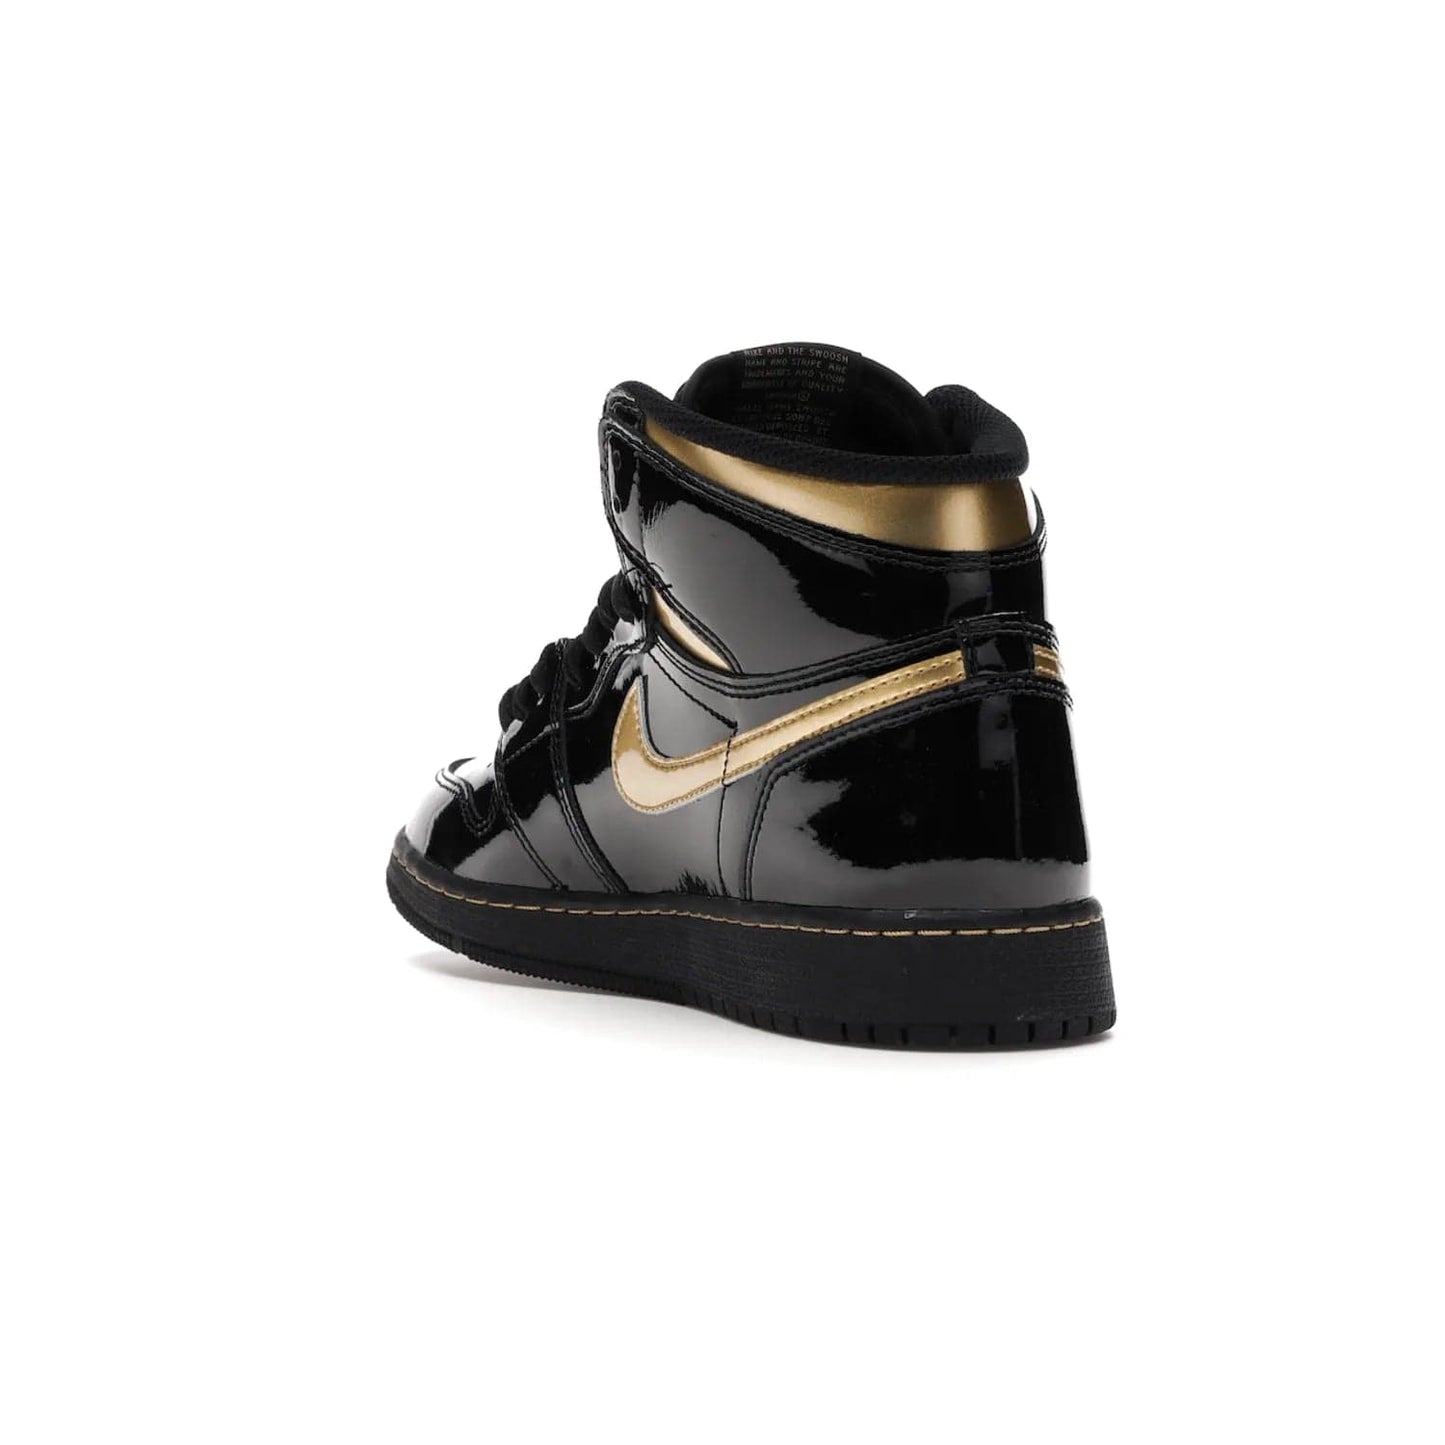 Jordan 1 Retro High Black Metallic Gold (2020) (GS) - Image 25 - Only at www.BallersClubKickz.com - Shop the Kids Air Jordan 1 Retro High in Black Metallic Gold for a stylish and comfortable sneaker kids can love. Featuring black and metallic gold patent leather uppers, metallic gold accents, and an Air sole unit for extra cushioning.